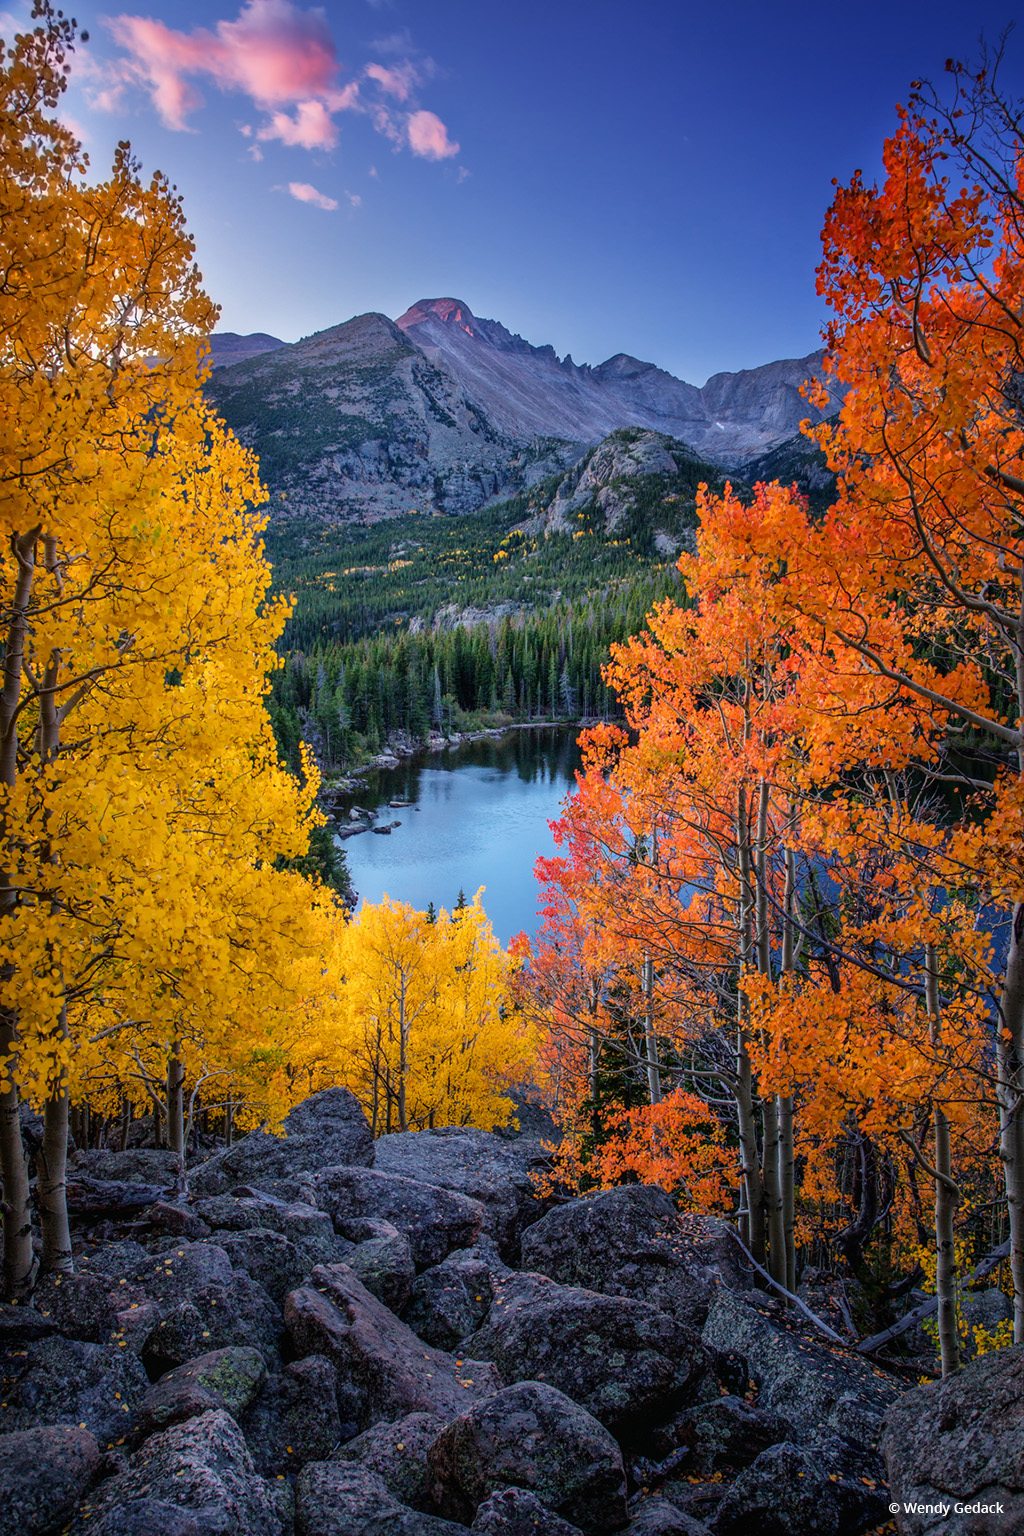 Today’s Photo Of The Day is “Absorb Every Moment of Wonder” by Wendy Gedack. Location: Rocky Mountain National Park, Colorado.